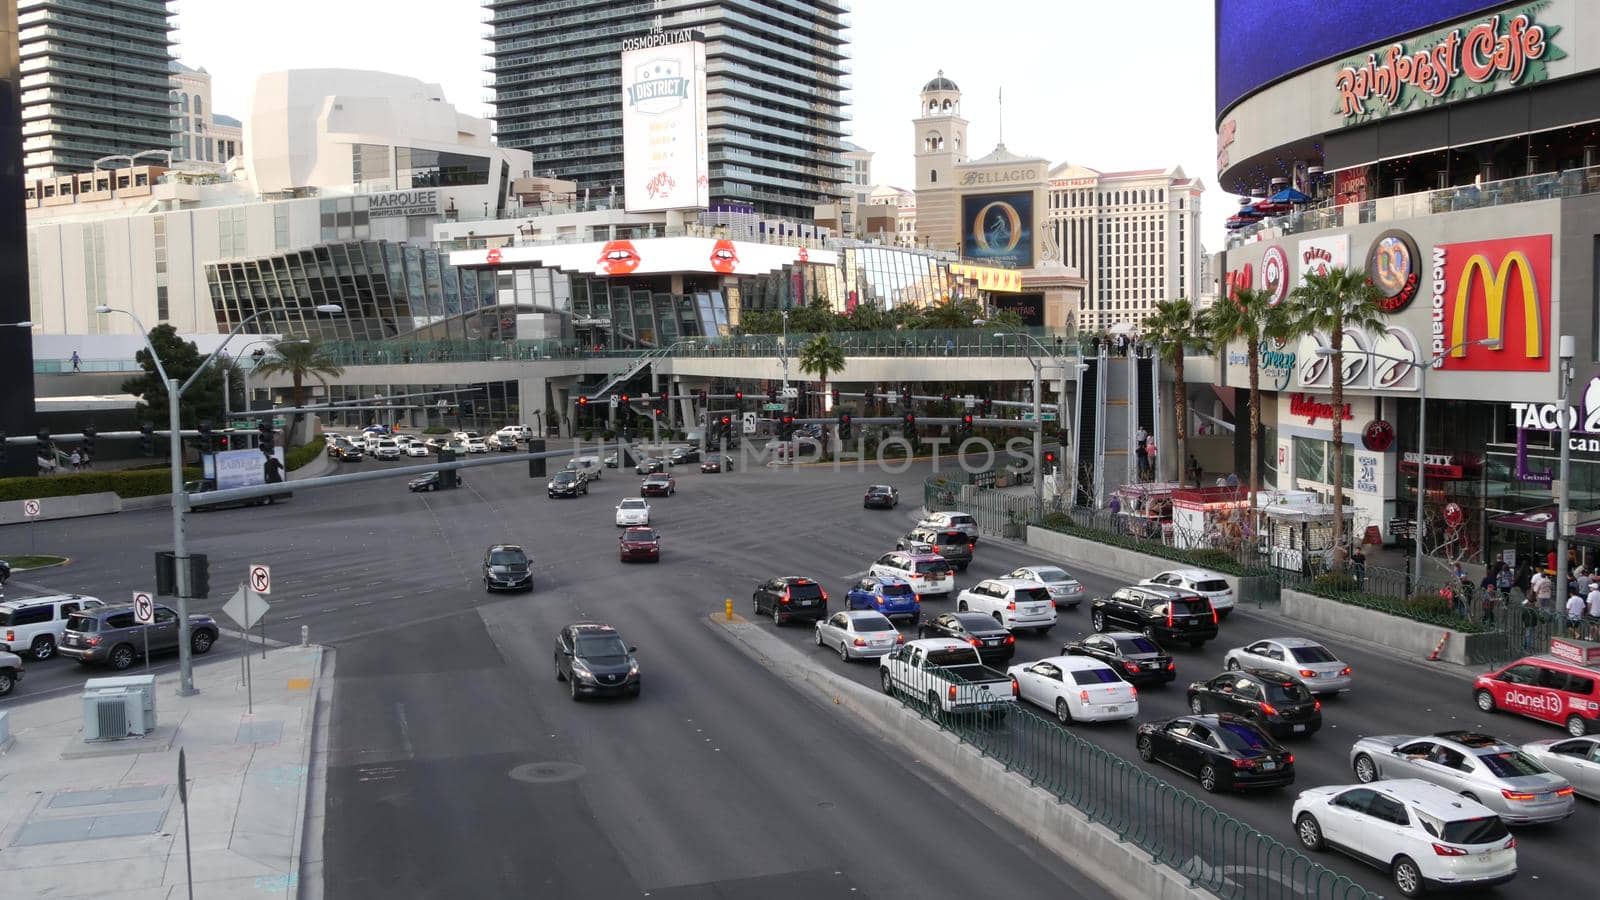 LAS VEGAS, NEVADA USA - 5 MAR 2020: The Strip boulevard with luxury casino and hotels in gambling sin city. Car traffic on road to Fremont street in tourist money playing resort. People walking by DogoraSun